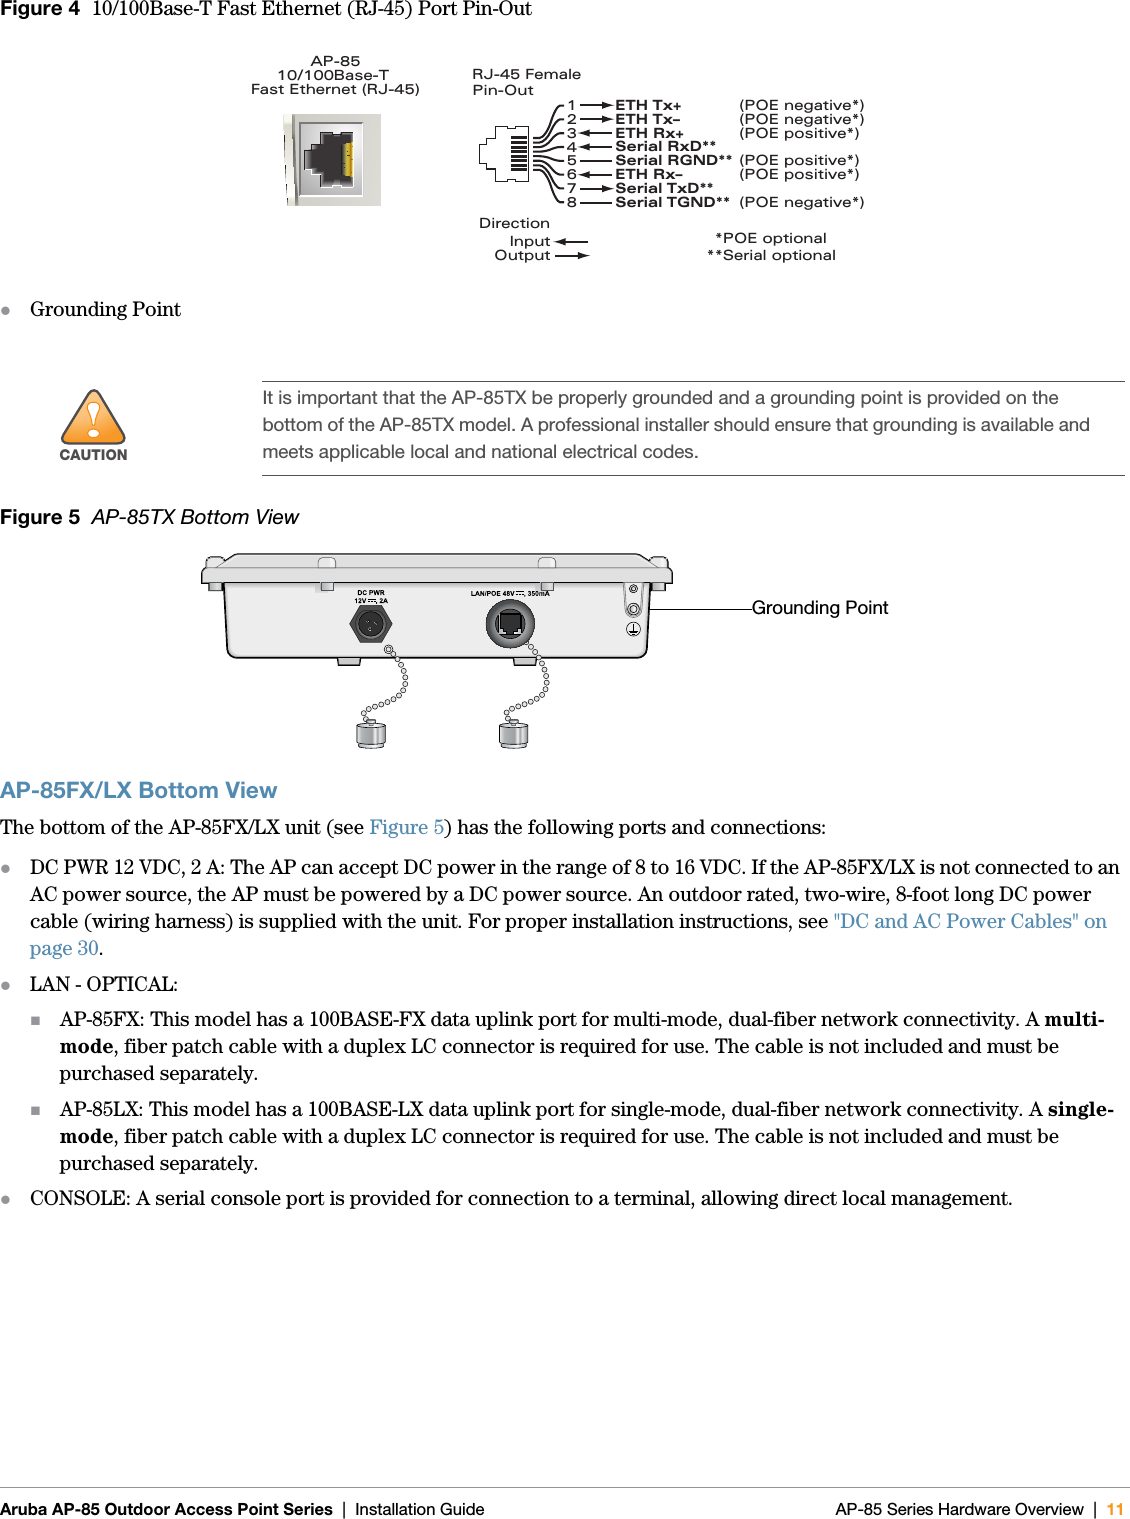  Aruba AP-85 Outdoor Access Point Series | Installation Guide AP-85 Series Hardware Overview | 11Figure 4  10/100Base-T Fast Ethernet (RJ-45) Port Pin-OutzGrounding PointFigure 5  AP-85TX Bottom ViewAP-85FX/LX Bottom ViewThe bottom of the AP-85FX/LX unit (see Figure 5) has the following ports and connections:zDC PWR 12 VDC, 2 A: The AP can accept DC power in the range of 8 to 16 VDC. If the AP-85FX/LX is not connected to an AC power source, the AP must be powered by a DC power source. An outdoor rated, two-wire, 8-foot long DC power cable (wiring harness) is supplied with the unit. For proper installation instructions, see &quot;DC and AC Power Cables&quot; on page30.zLAN - OPTICAL:AP-85FX: This model has a 100BASE-FX data uplink port for multi-mode, dual-fiber network connectivity. A multi-mode, fiber patch cable with a duplex LC connector is required for use. The cable is not included and must be purchased separately.AP-85LX: This model has a 100BASE-LX data uplink port for single-mode, dual-fiber network connectivity. A single-mode, fiber patch cable with a duplex LC connector is required for use. The cable is not included and must be purchased separately.zCONSOLE: A serial console port is provided for connection to a terminal, allowing direct local management.!CAUTIONIt is important that the AP-85TX be properly grounded and a grounding point is provided on the bottom of the AP-85TX model. A professional installer should ensure that grounding is available and meets applicable local and national electrical codes.AP-8510/100Base-T Fast Ethernet (RJ-45)RJ-45 FemalePin-Out*POE optional**Serial optionalSerial RxD**Serial RGND** (POE positive*) Serial TxD**Serial TGND** (POE negative*)12345678ETH Tx+ (POE negative*)ETH Tx– (POE negative*)ETH Rx+ (POE positive*)ETH Rx– (POE positive*)DirectionInputOutputGrounding Point